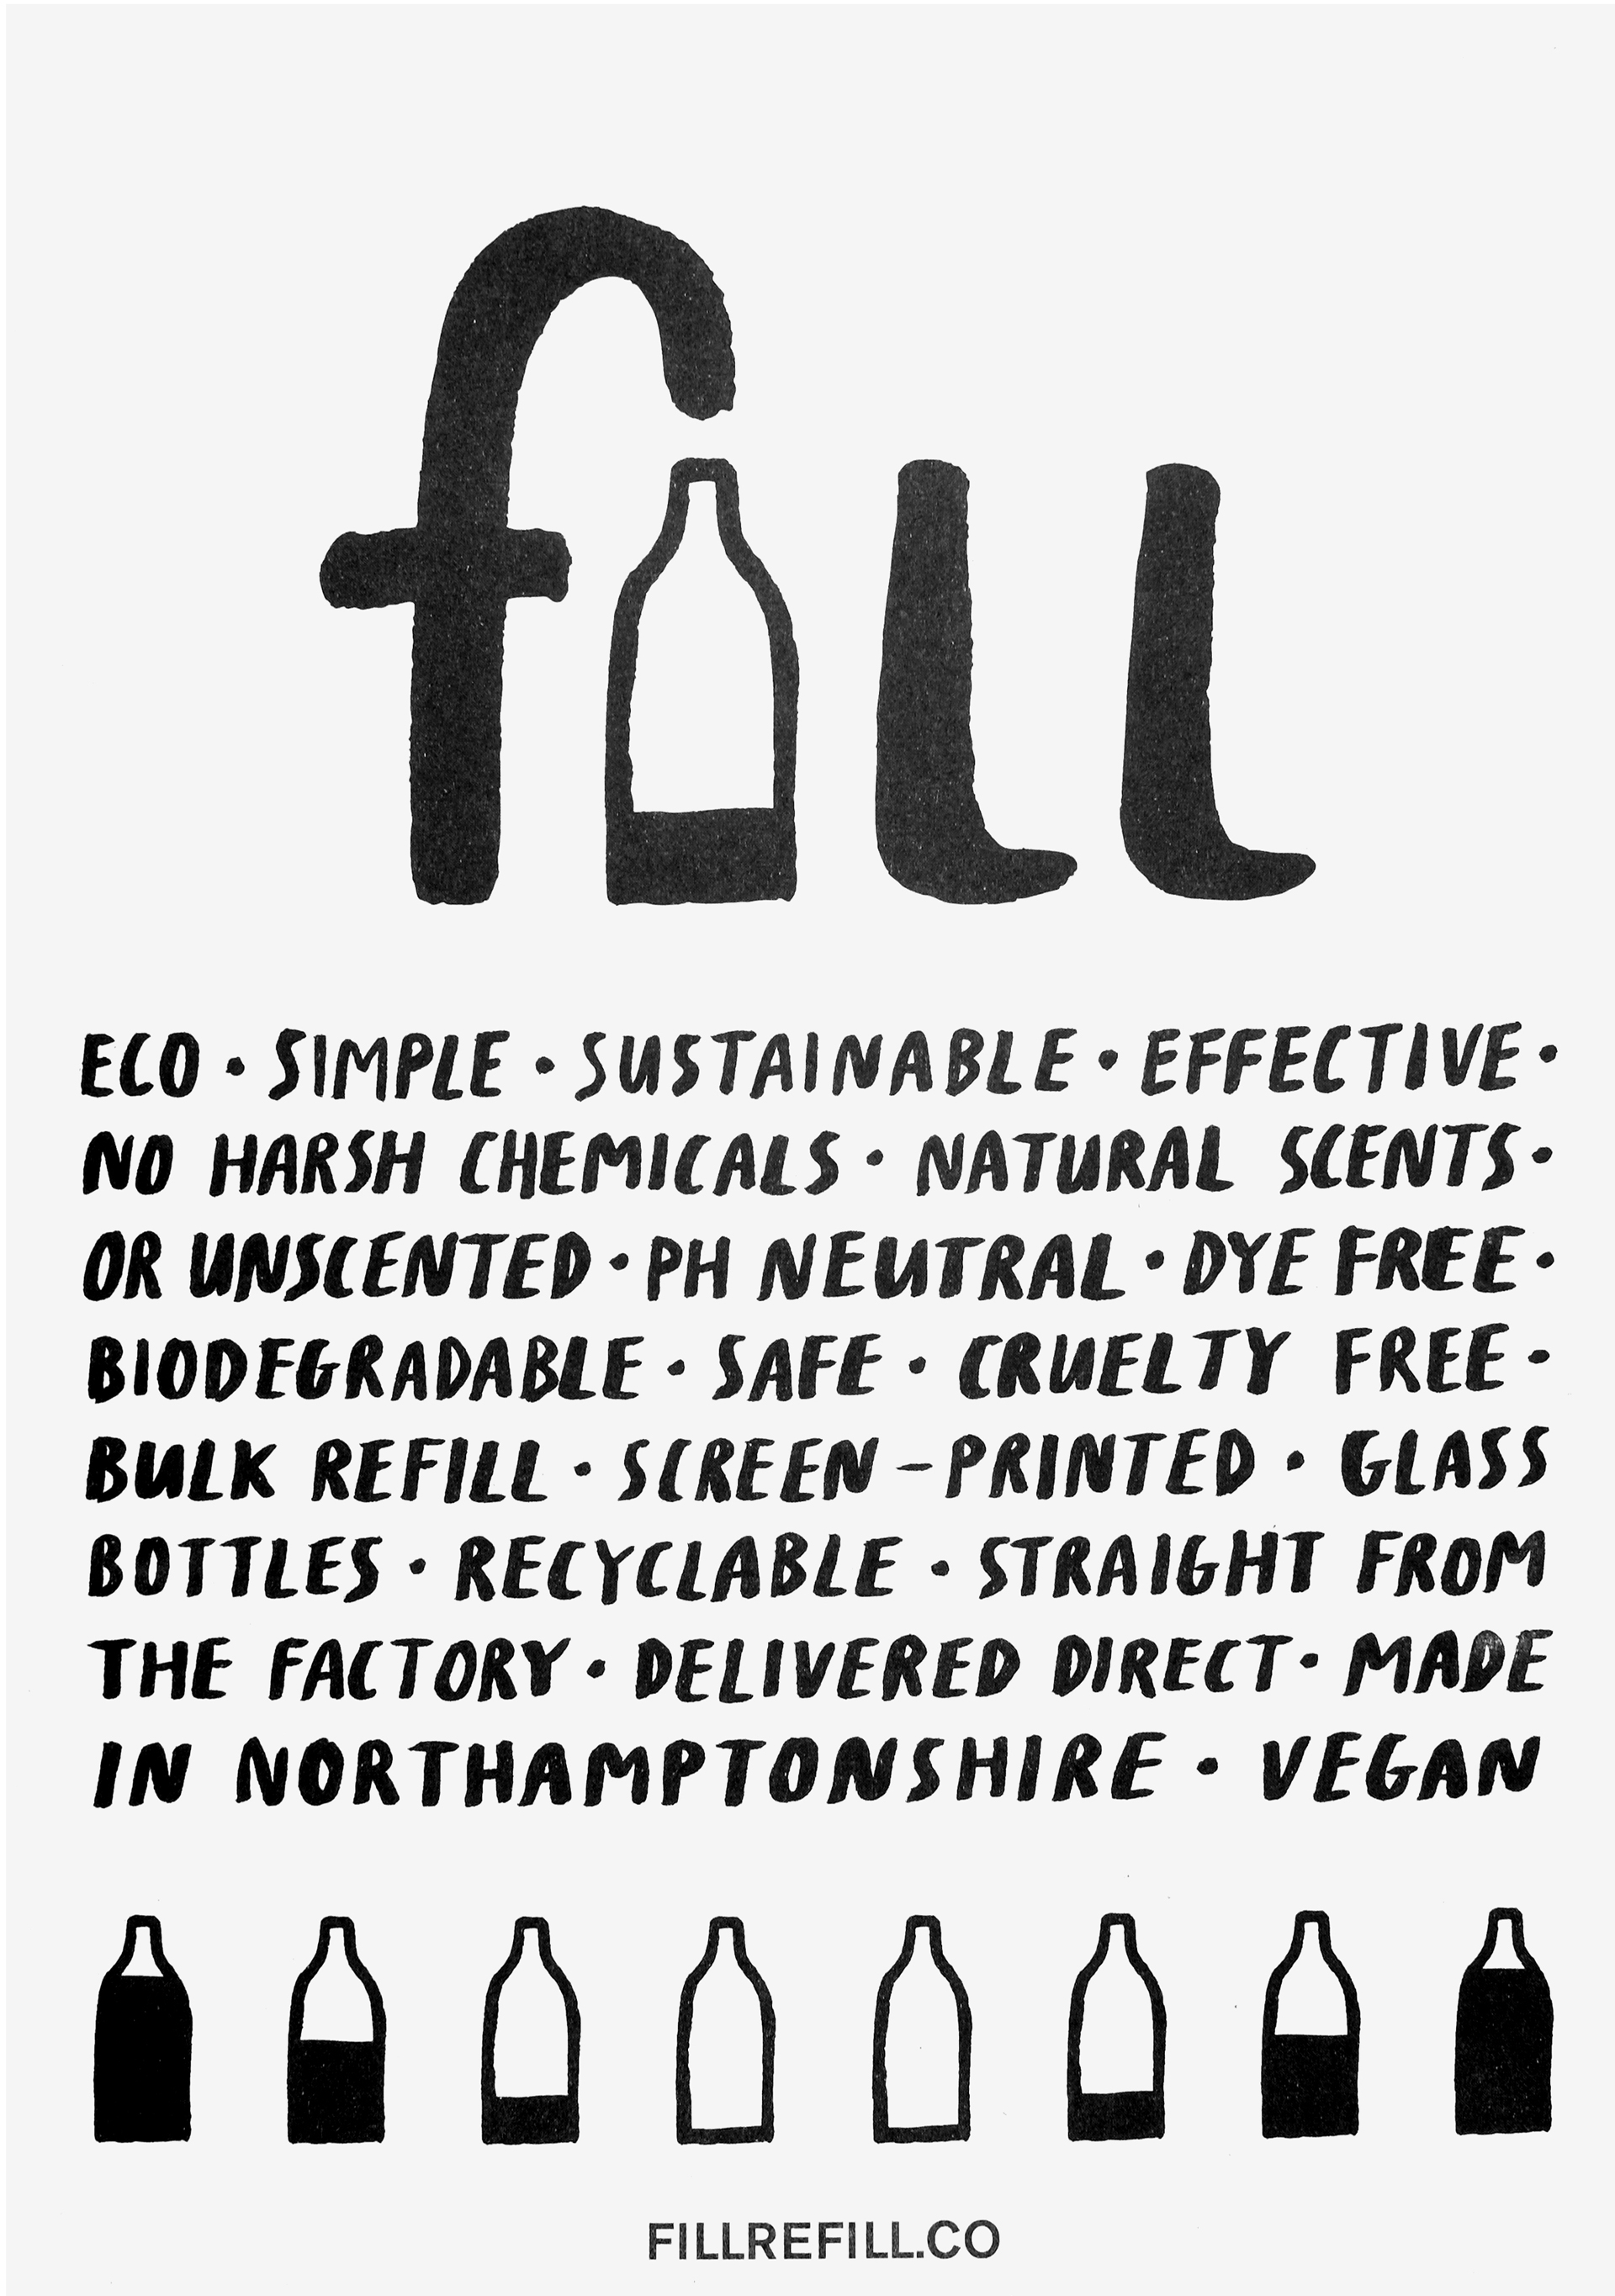 Media - Shop - Fill Refill Co - Refillable Eco Household & Personal Care  Products